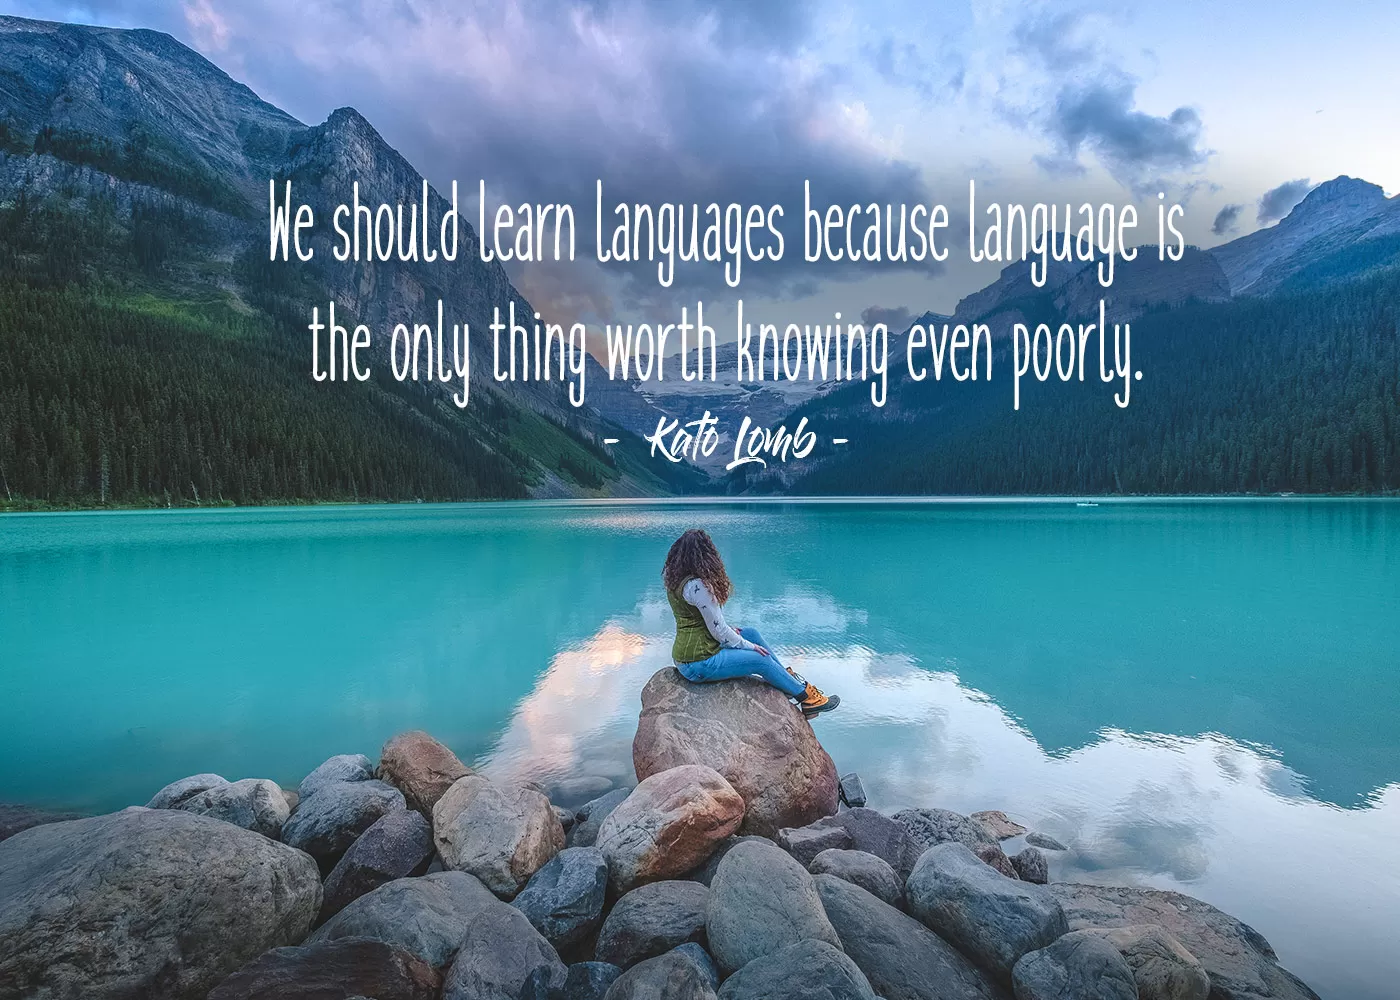 We should learn languages becuase language is the only thing worth knowing even poorly - Kato Lomb